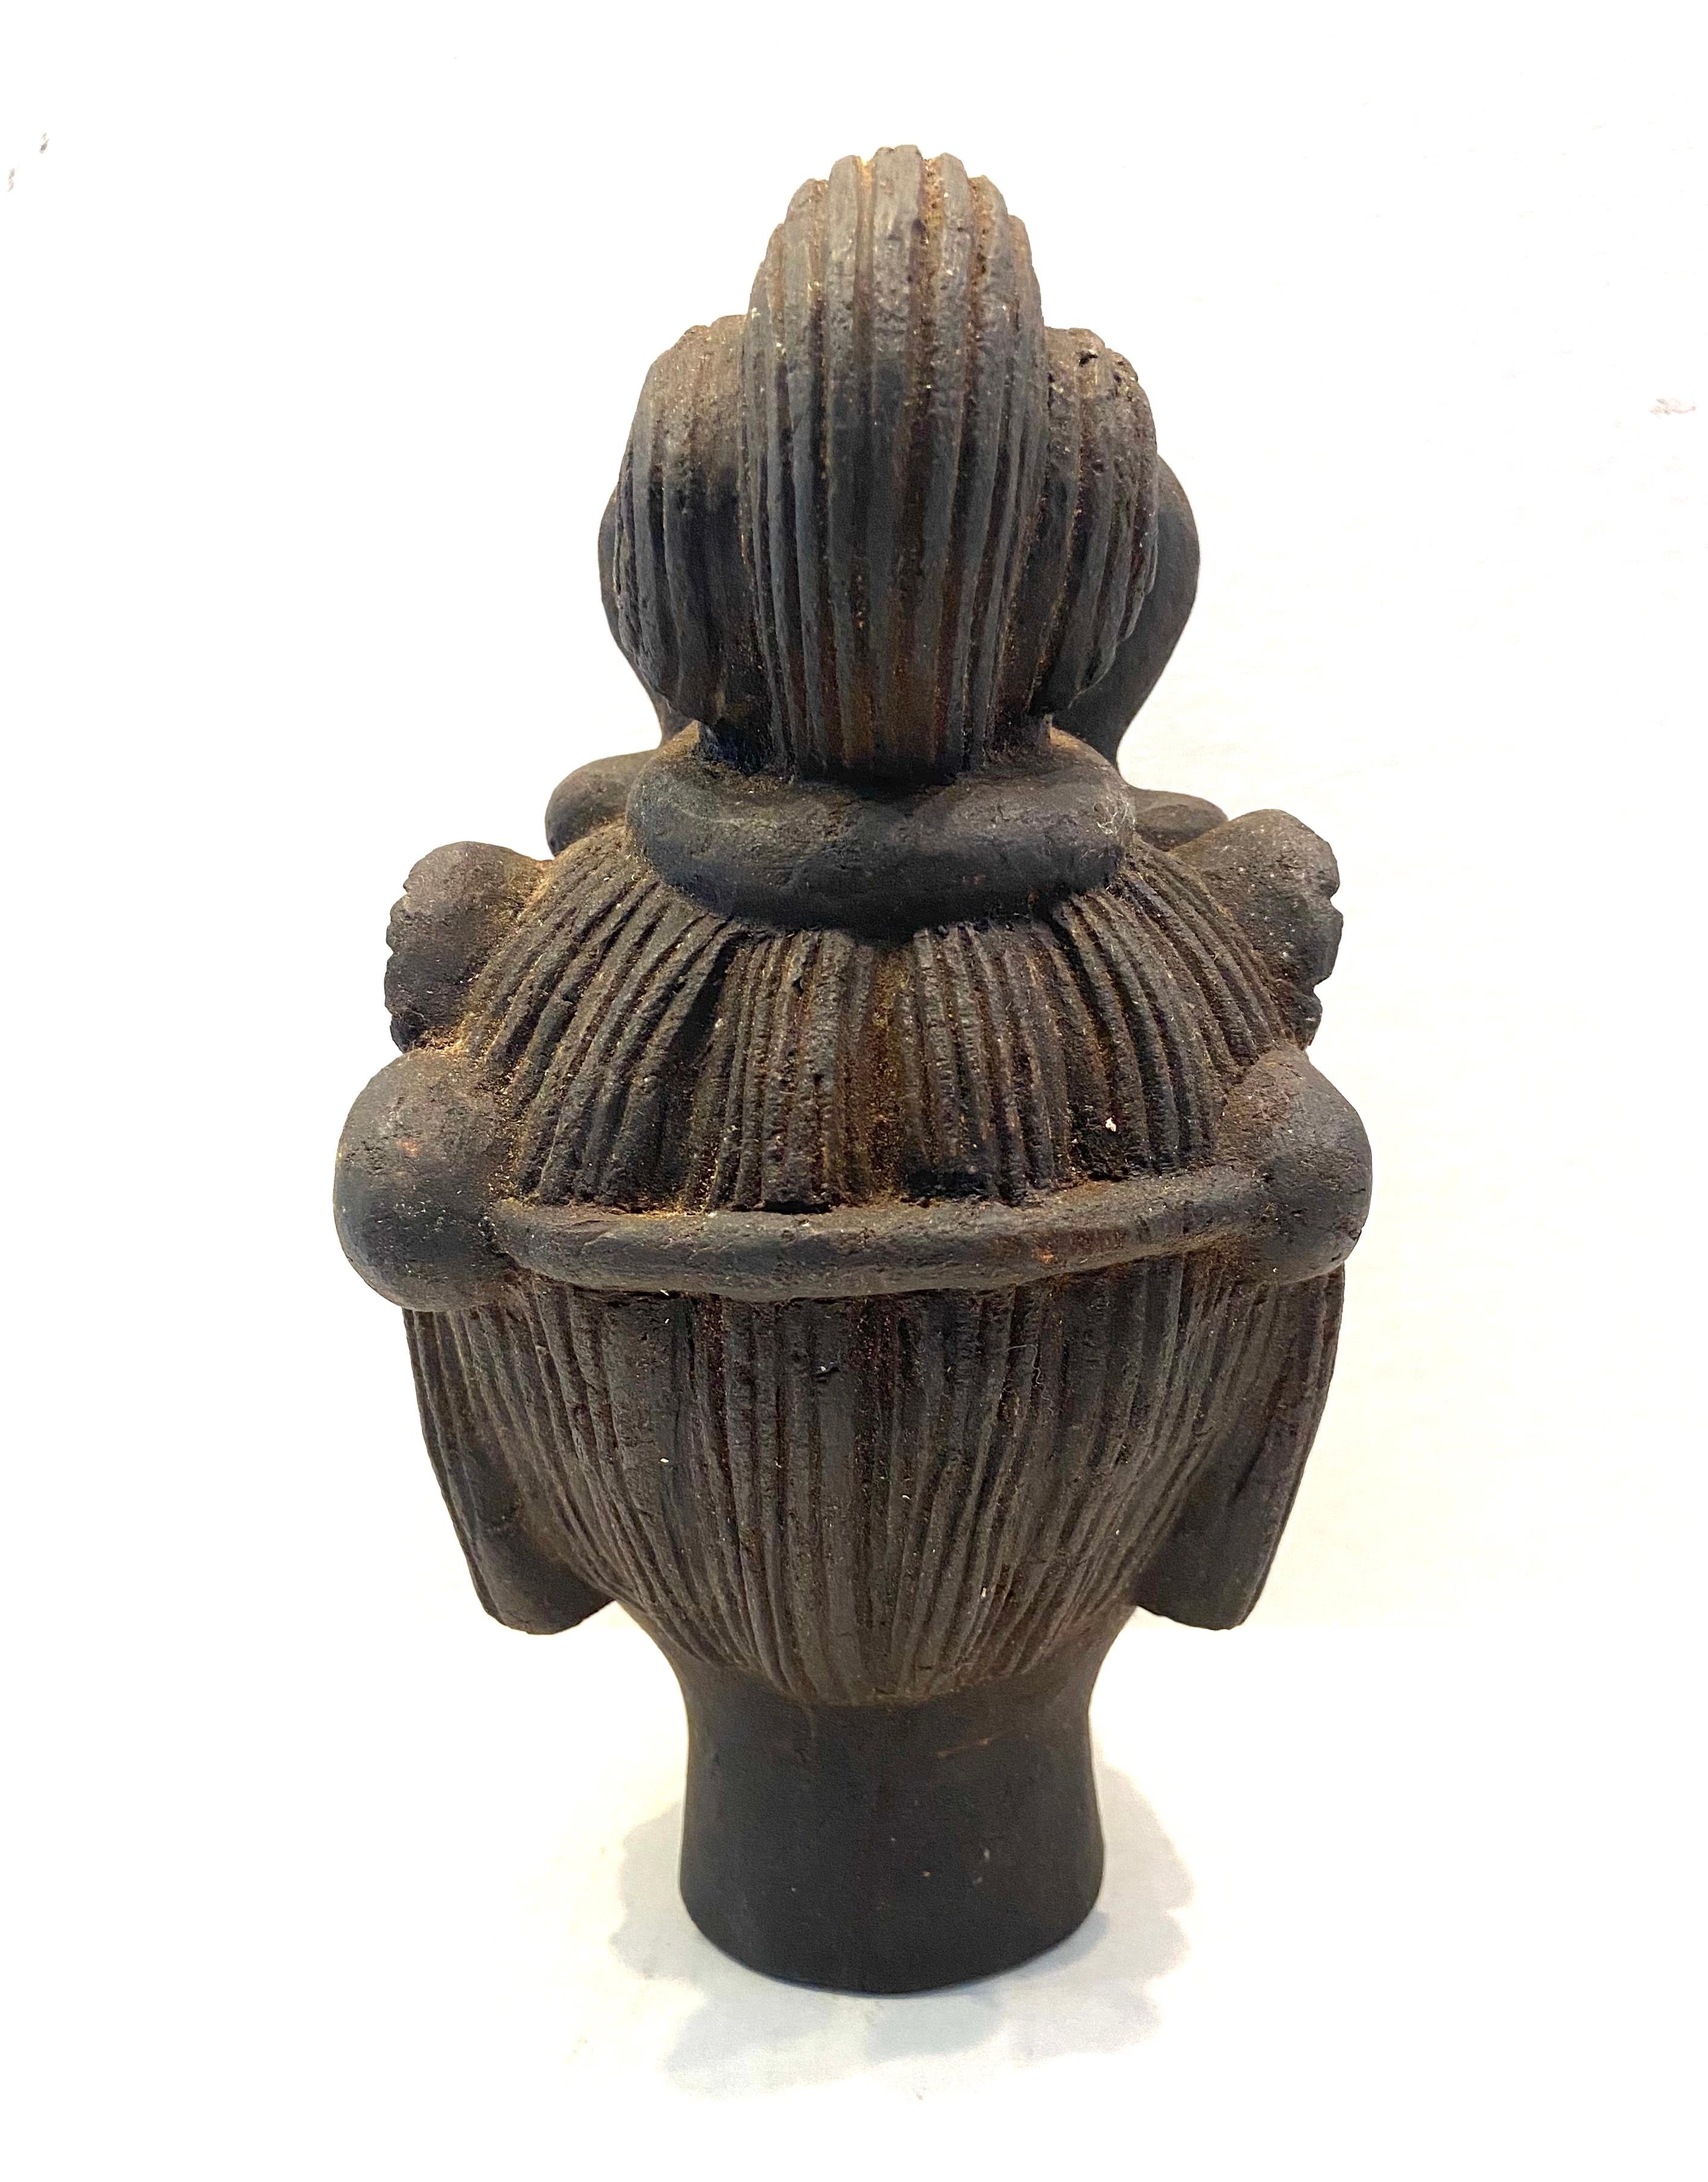 Fine Chinese agarwood Guan Yin Head, black polychrome. 20th century.
Agarwood is a fragrant dark resinous wood used in incense, perfume, and carvings. One of the main reasons for the relative rarity and high cost of Agarwood is the depletion of the